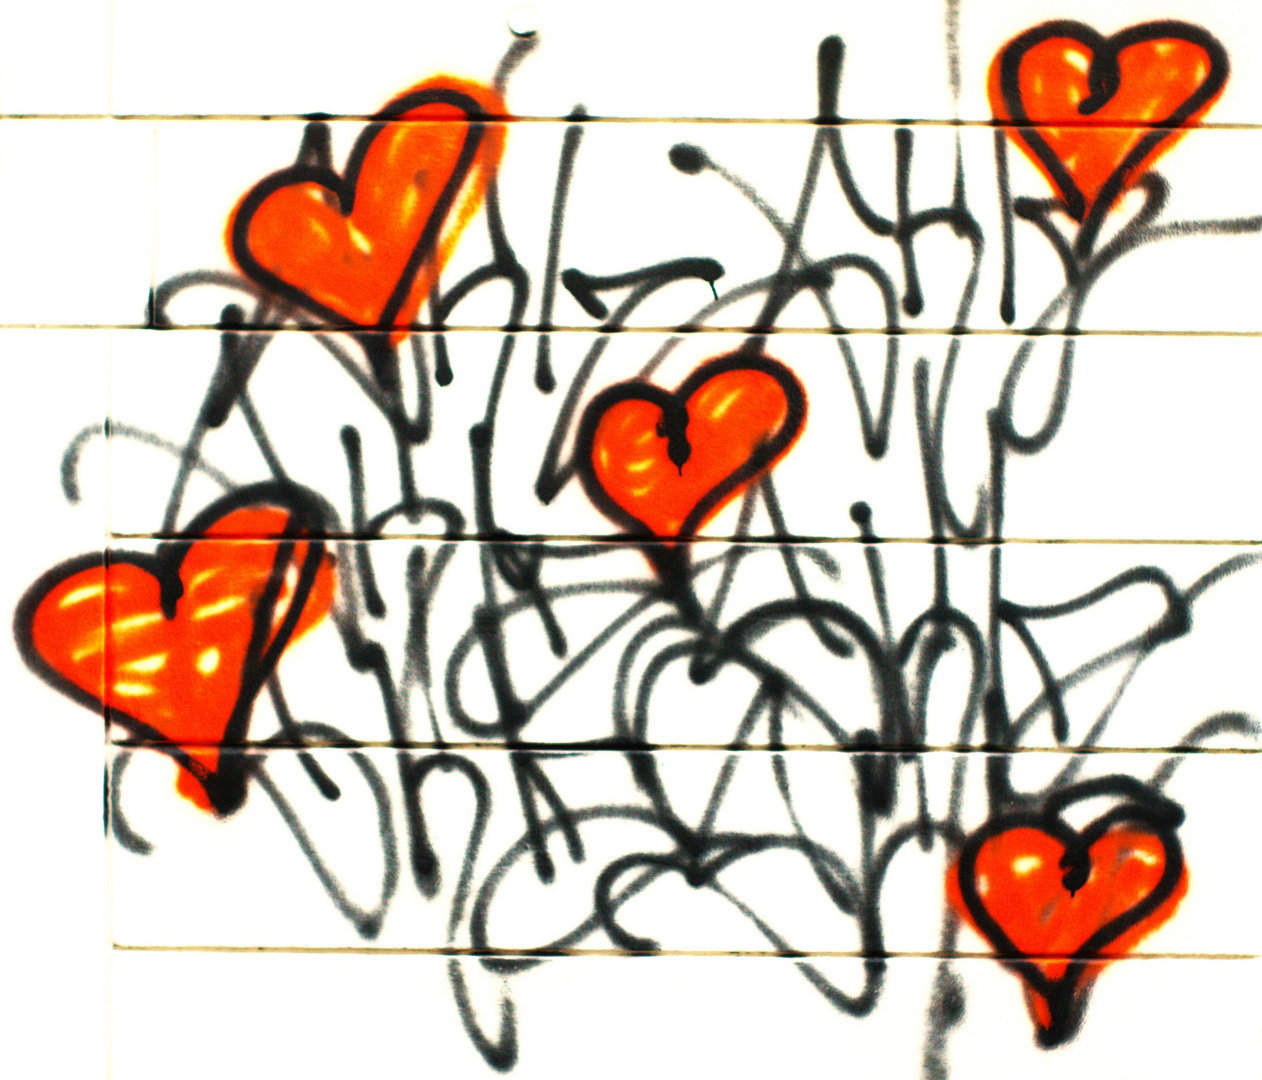 From Heart_To_Heart /_Connecting-Feeling (Graffiti )